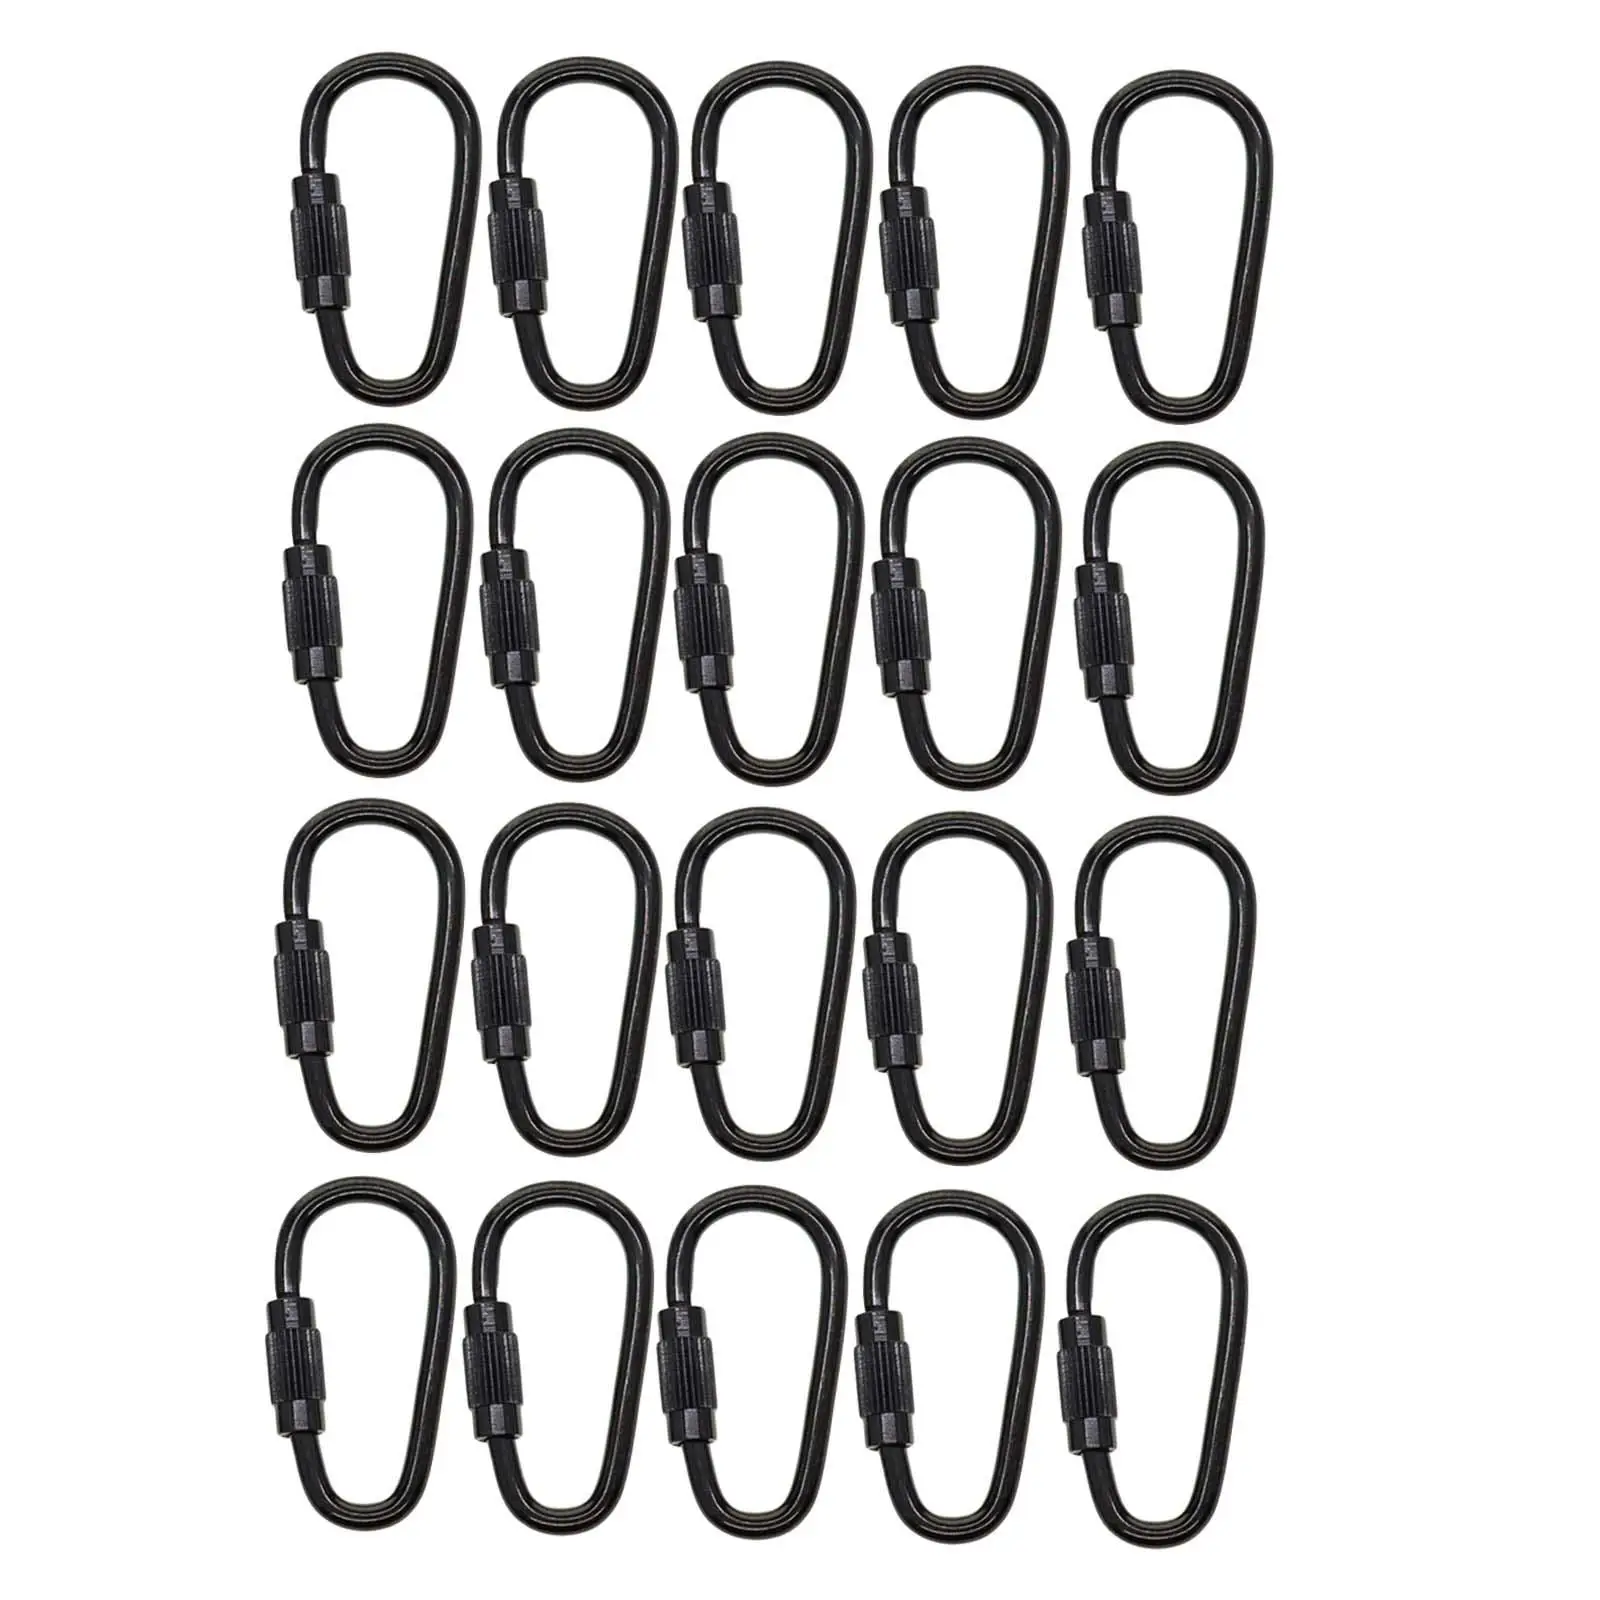 20x Small Locking Carabiner Clip 1 inch Heavy Duty Screw Lock Carabiner for Traveling Backpacking Hiking Fishing Accessories